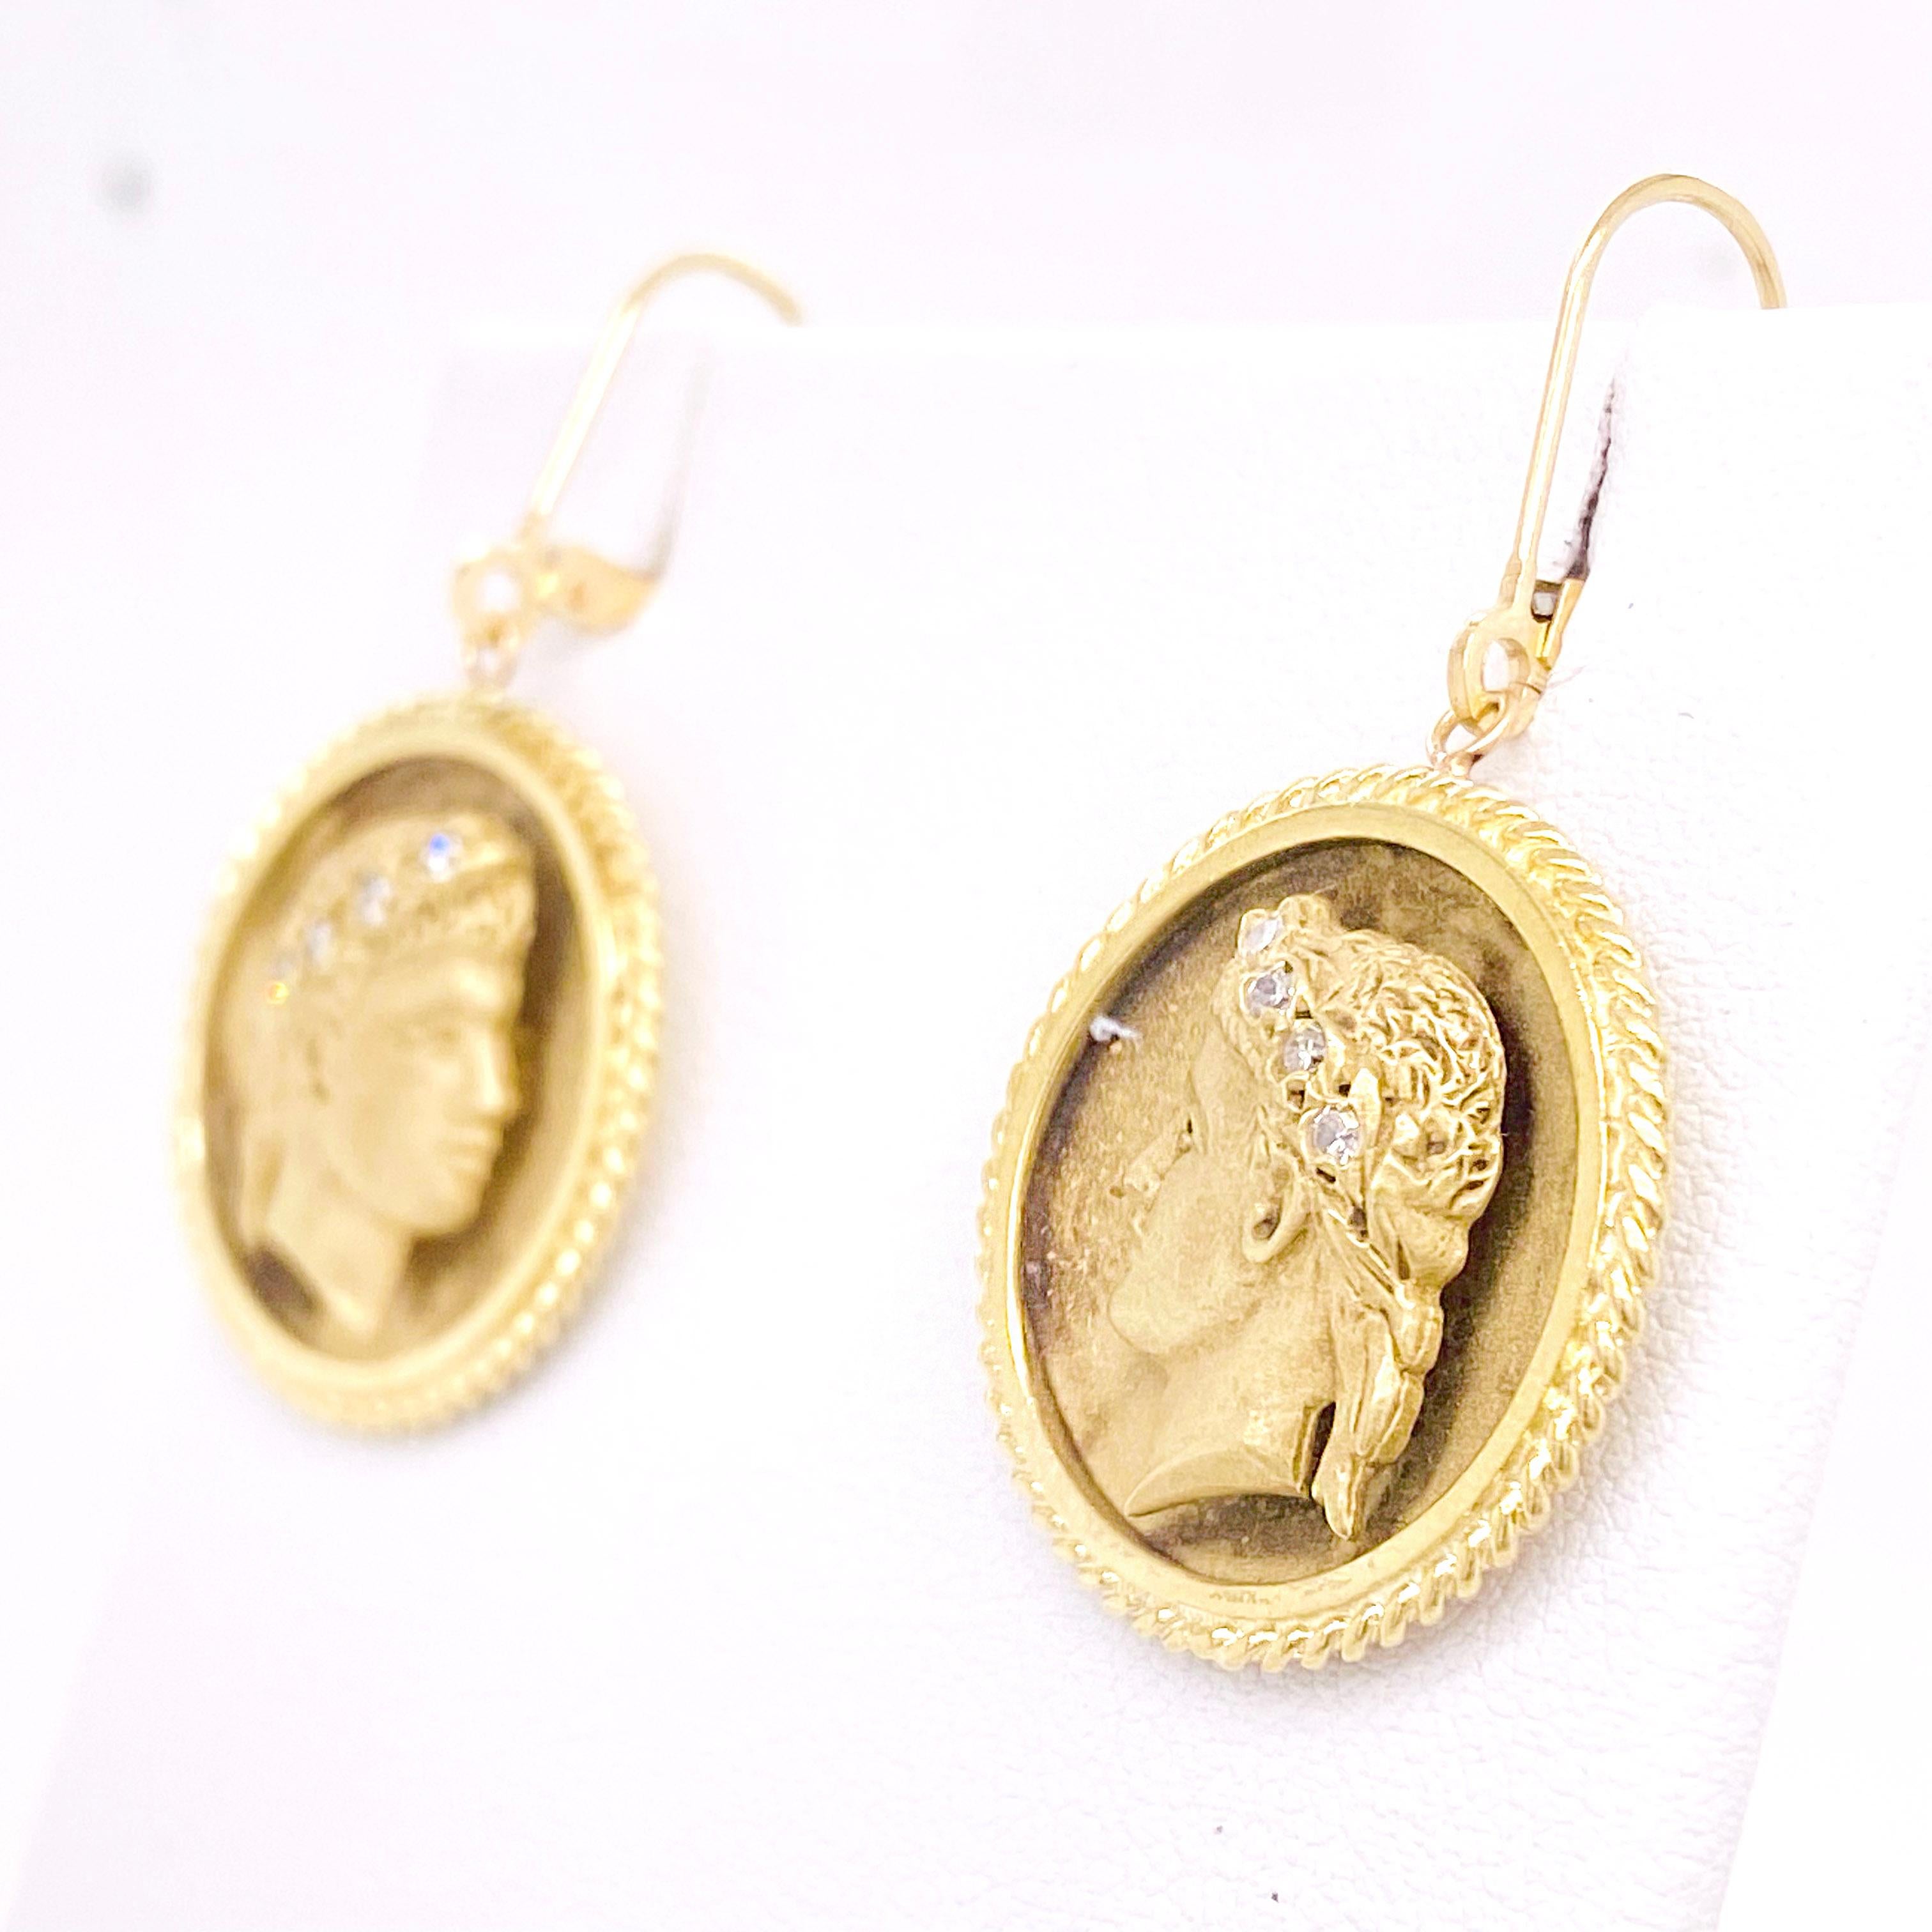 The 18 karat yellow gold Custom Roman Earrings have a side profile of a Roman God that has four diamonds in each of their hair. The earrings are mirror images of each other and the head is raised off of the 3/4 inch disk (21.6 millimeters). There is